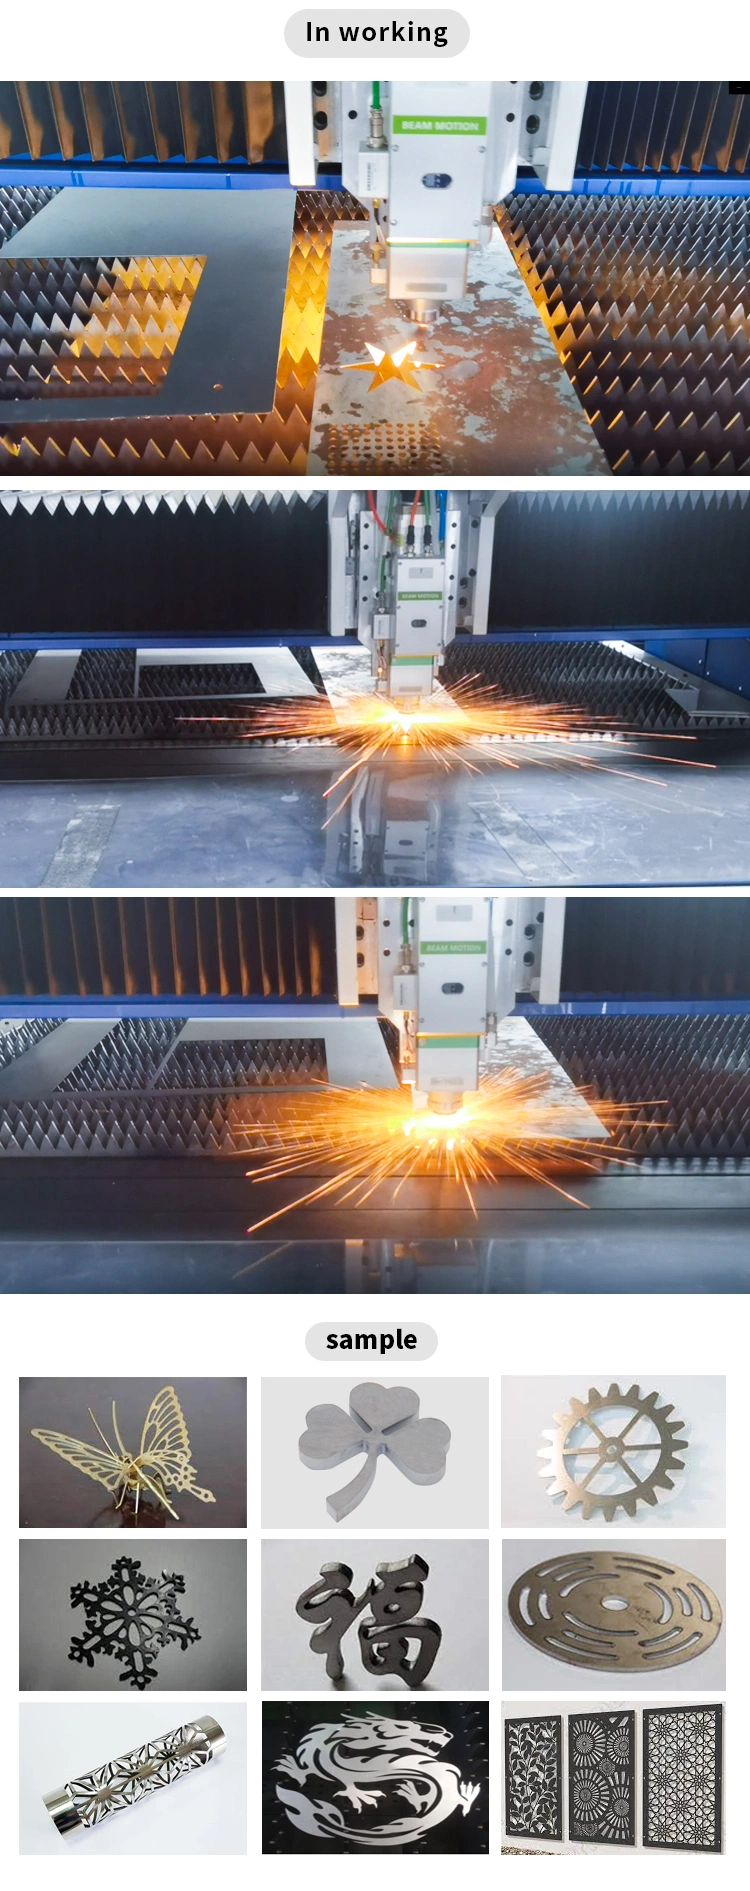 Desktop CNC Fiber Laser Metal Cutting Machine with Exchange Table and Full Protection Cover Option for Plate Carbon Steel Sheet Iron Brass Copper Made in China